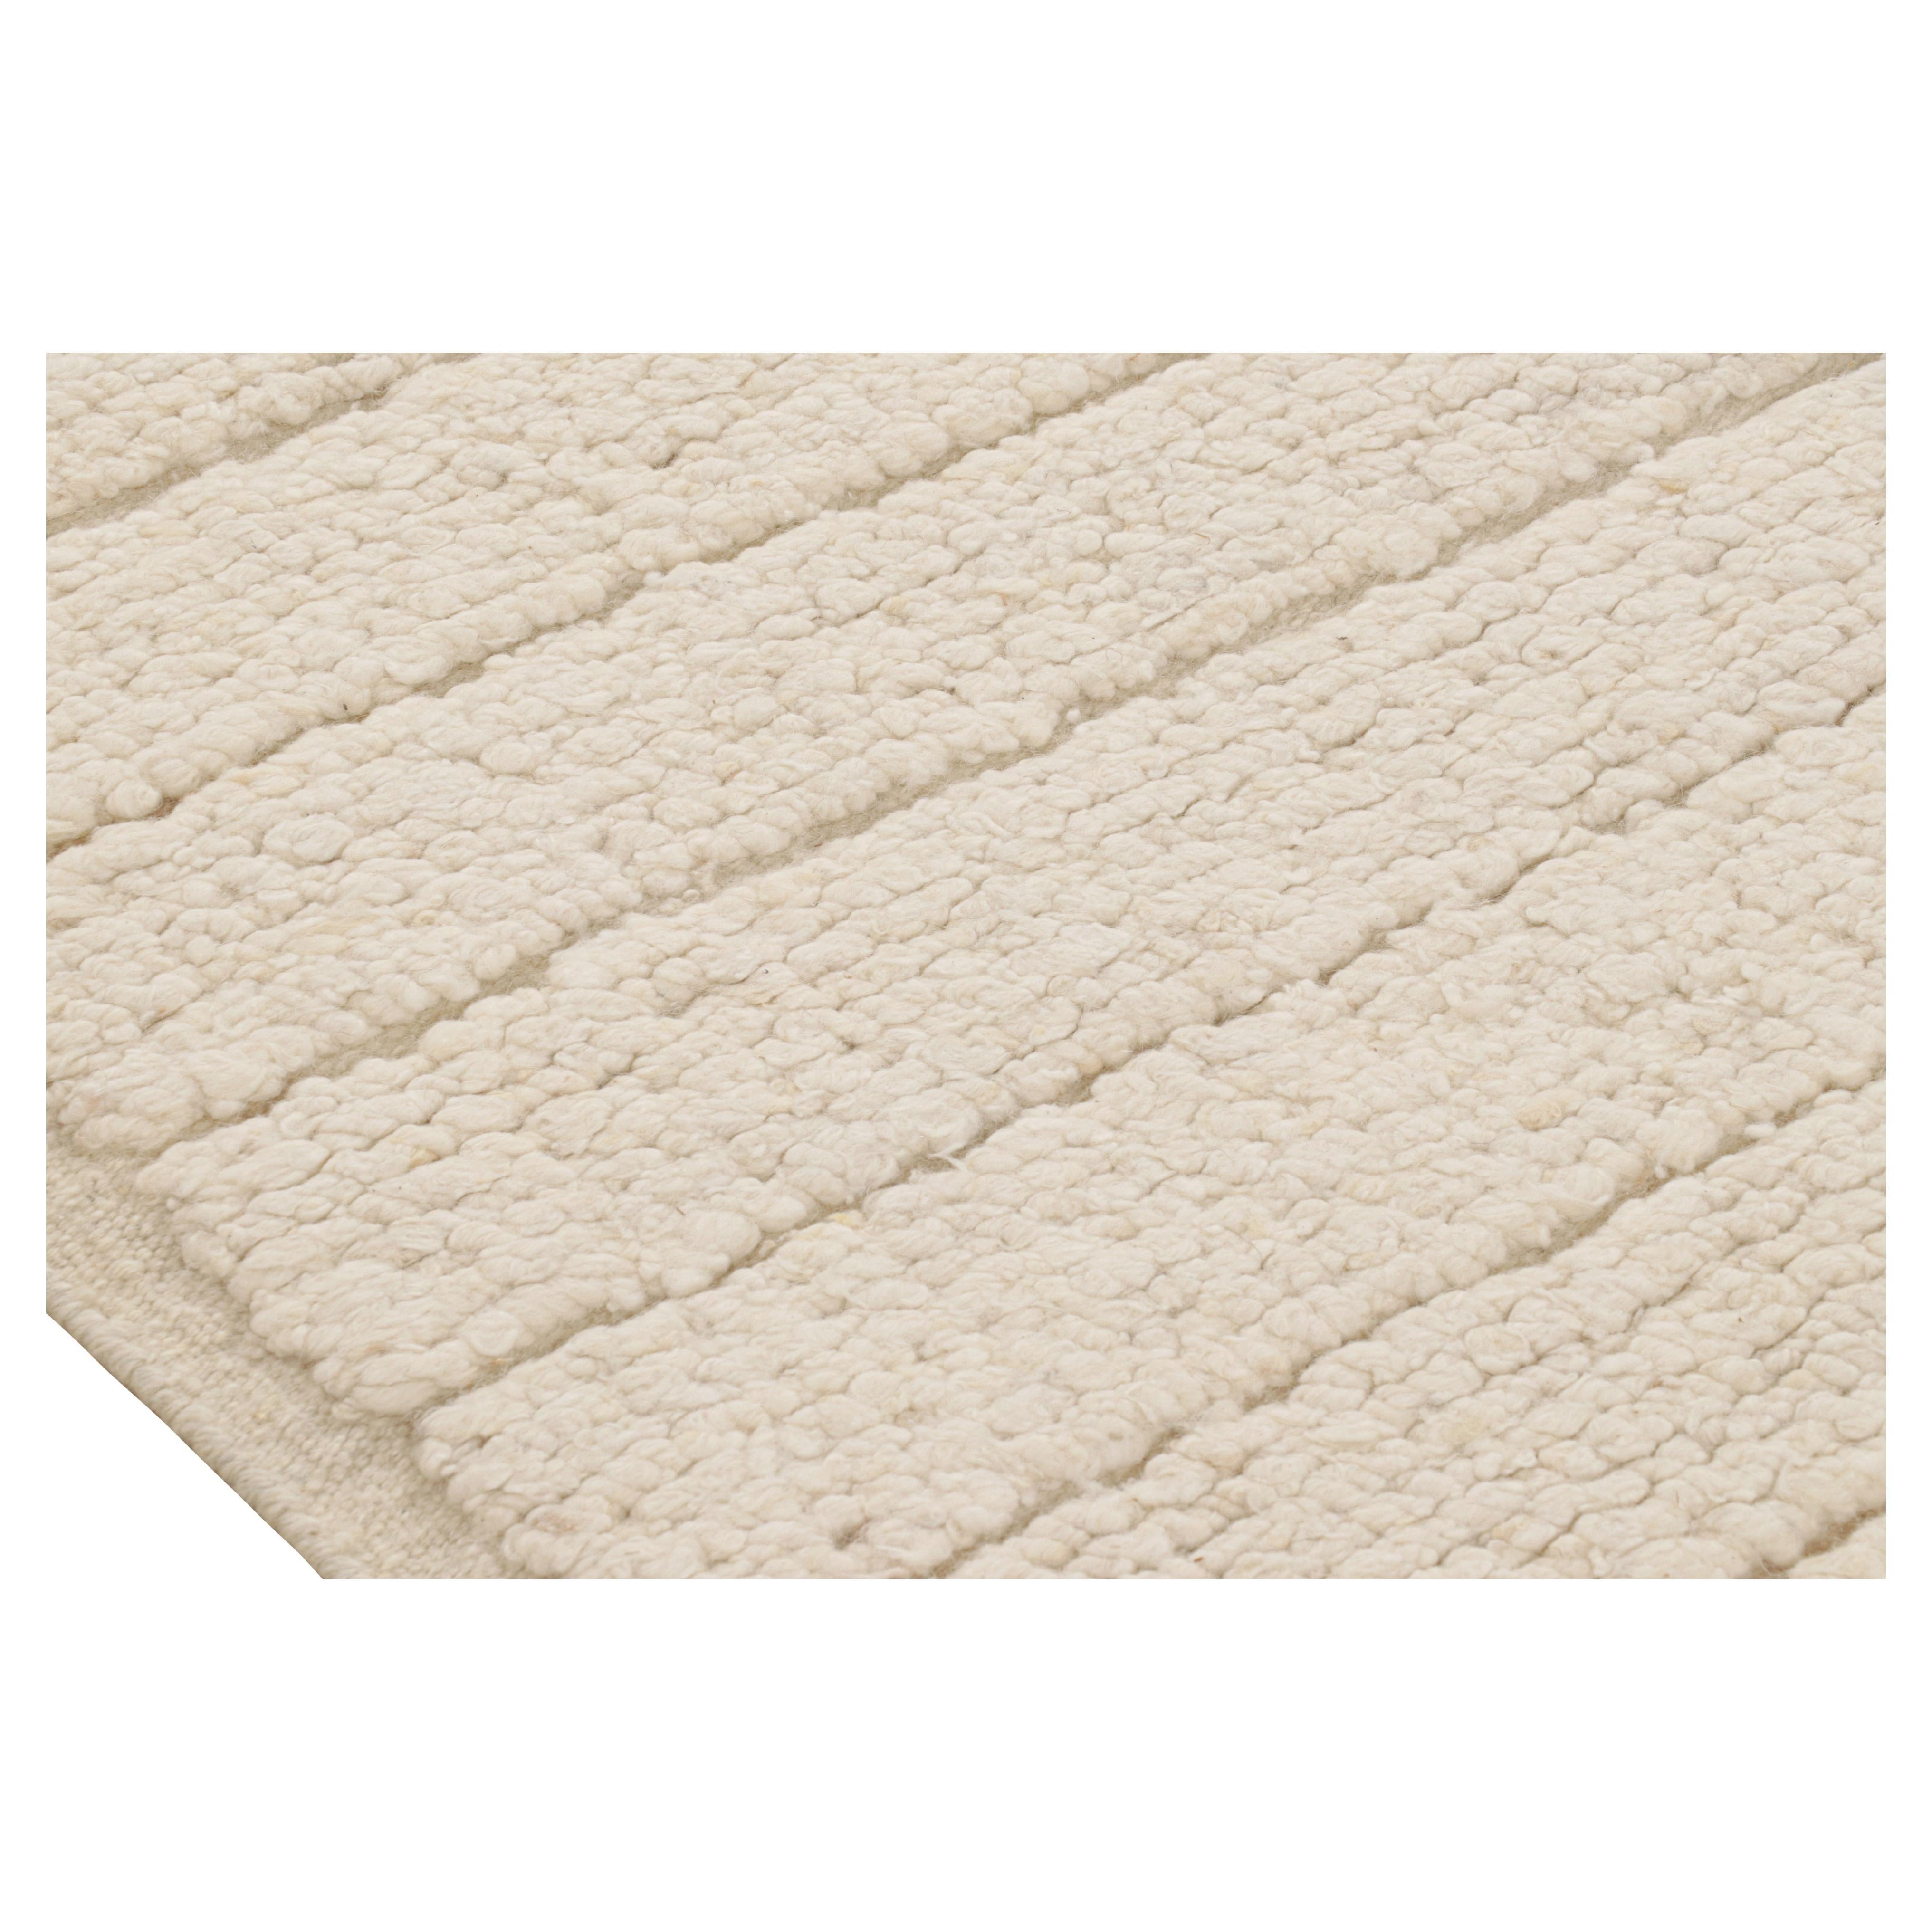 Rug & Kilim’s Textural Kilim Rug in Cream and White High-Low Stripes For Sale